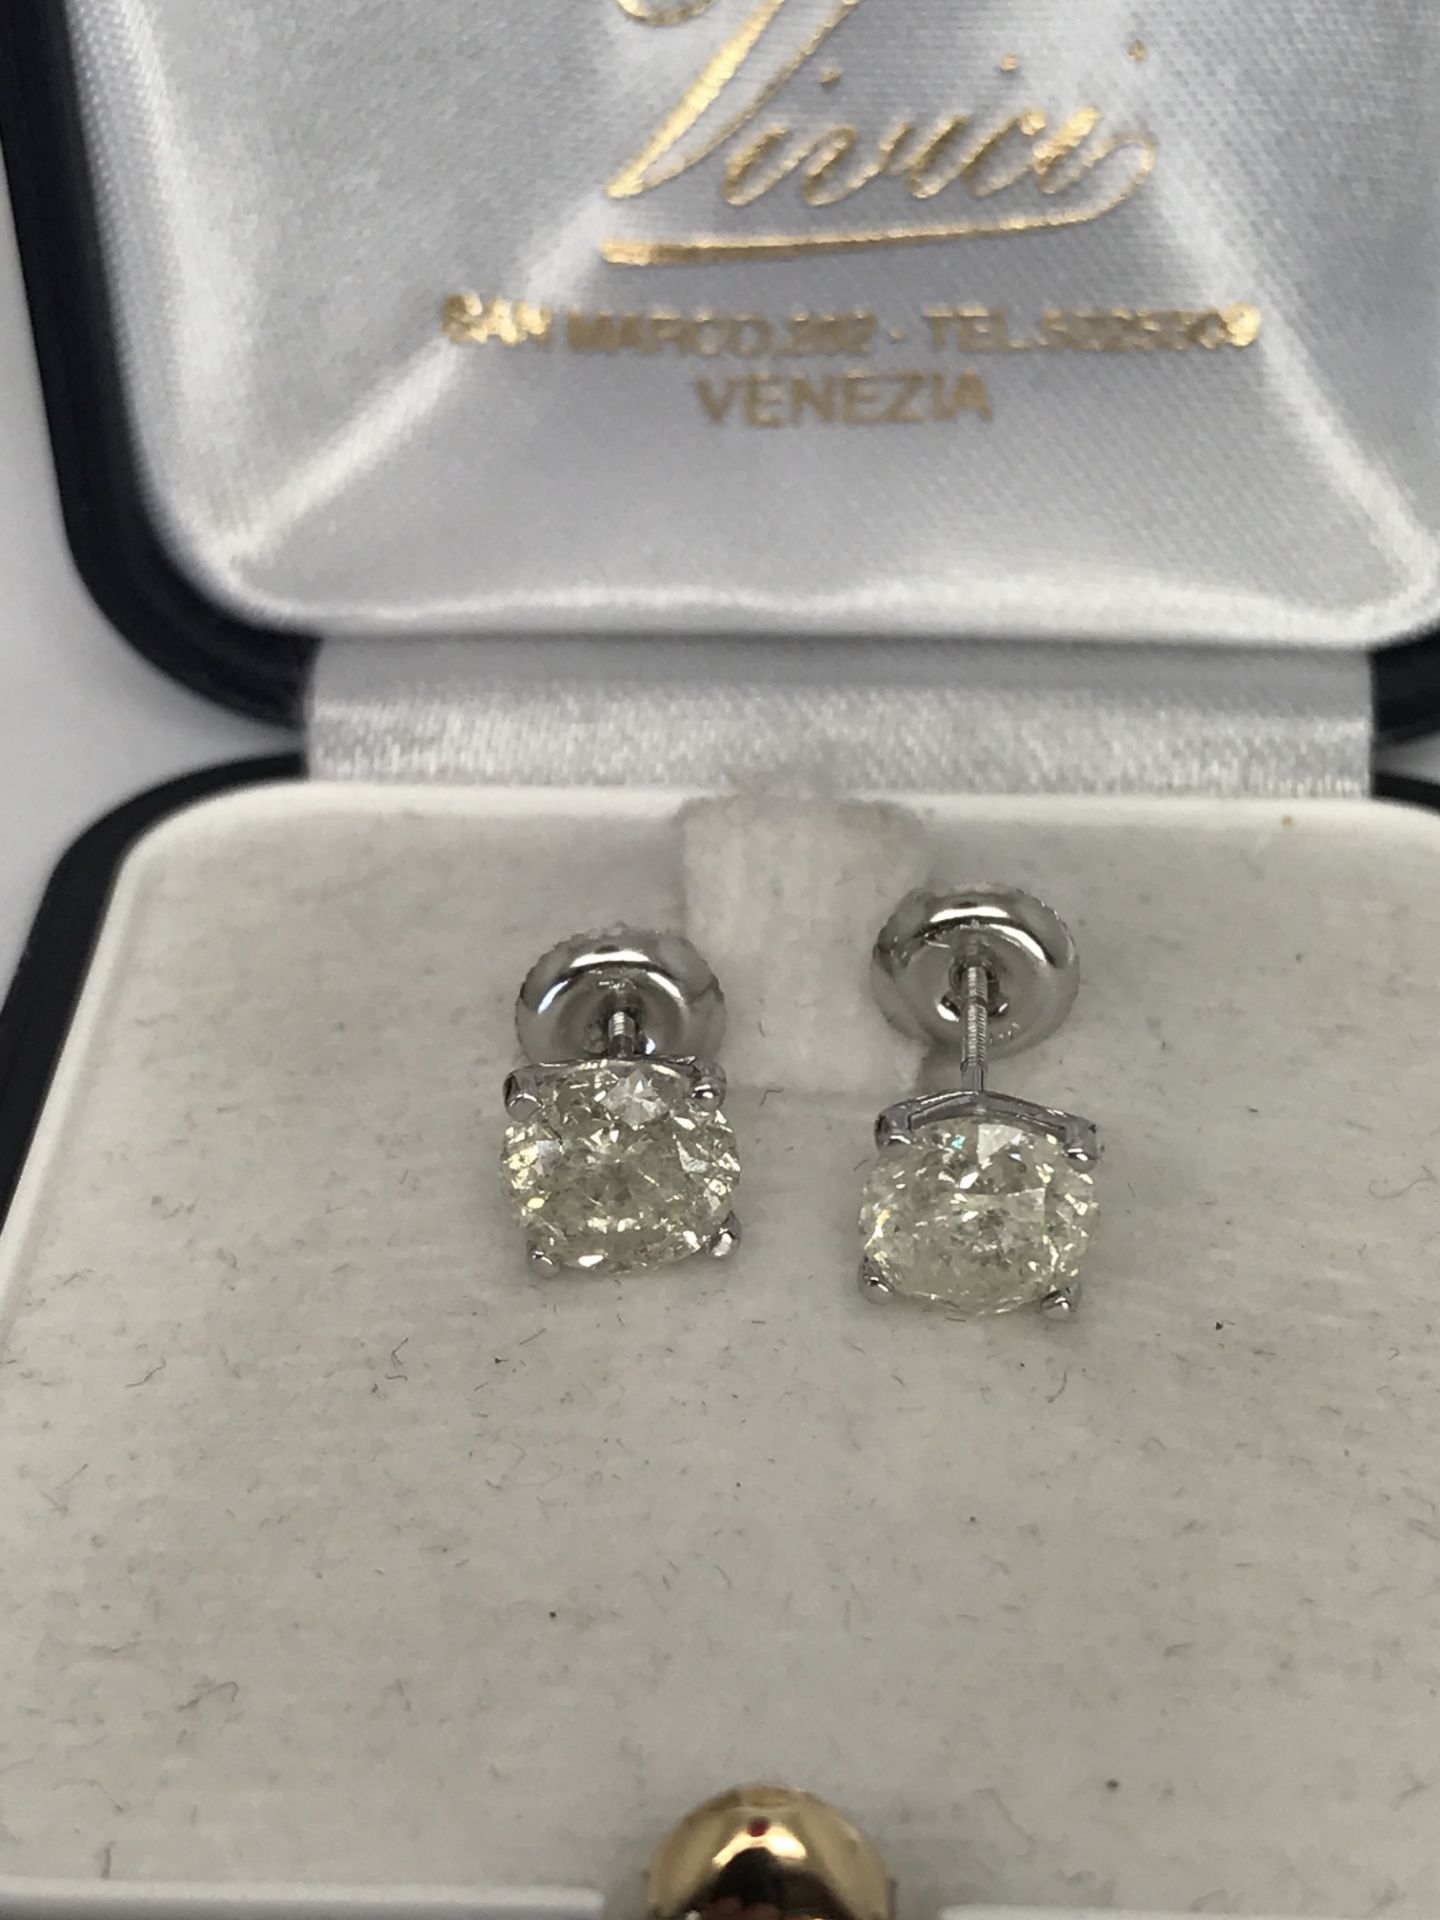 2,72ct DIAMOND SOLITAIRE EARRINGS (APPROX 1.36ct EACH EARRING) SCREW BACK - Image 2 of 2